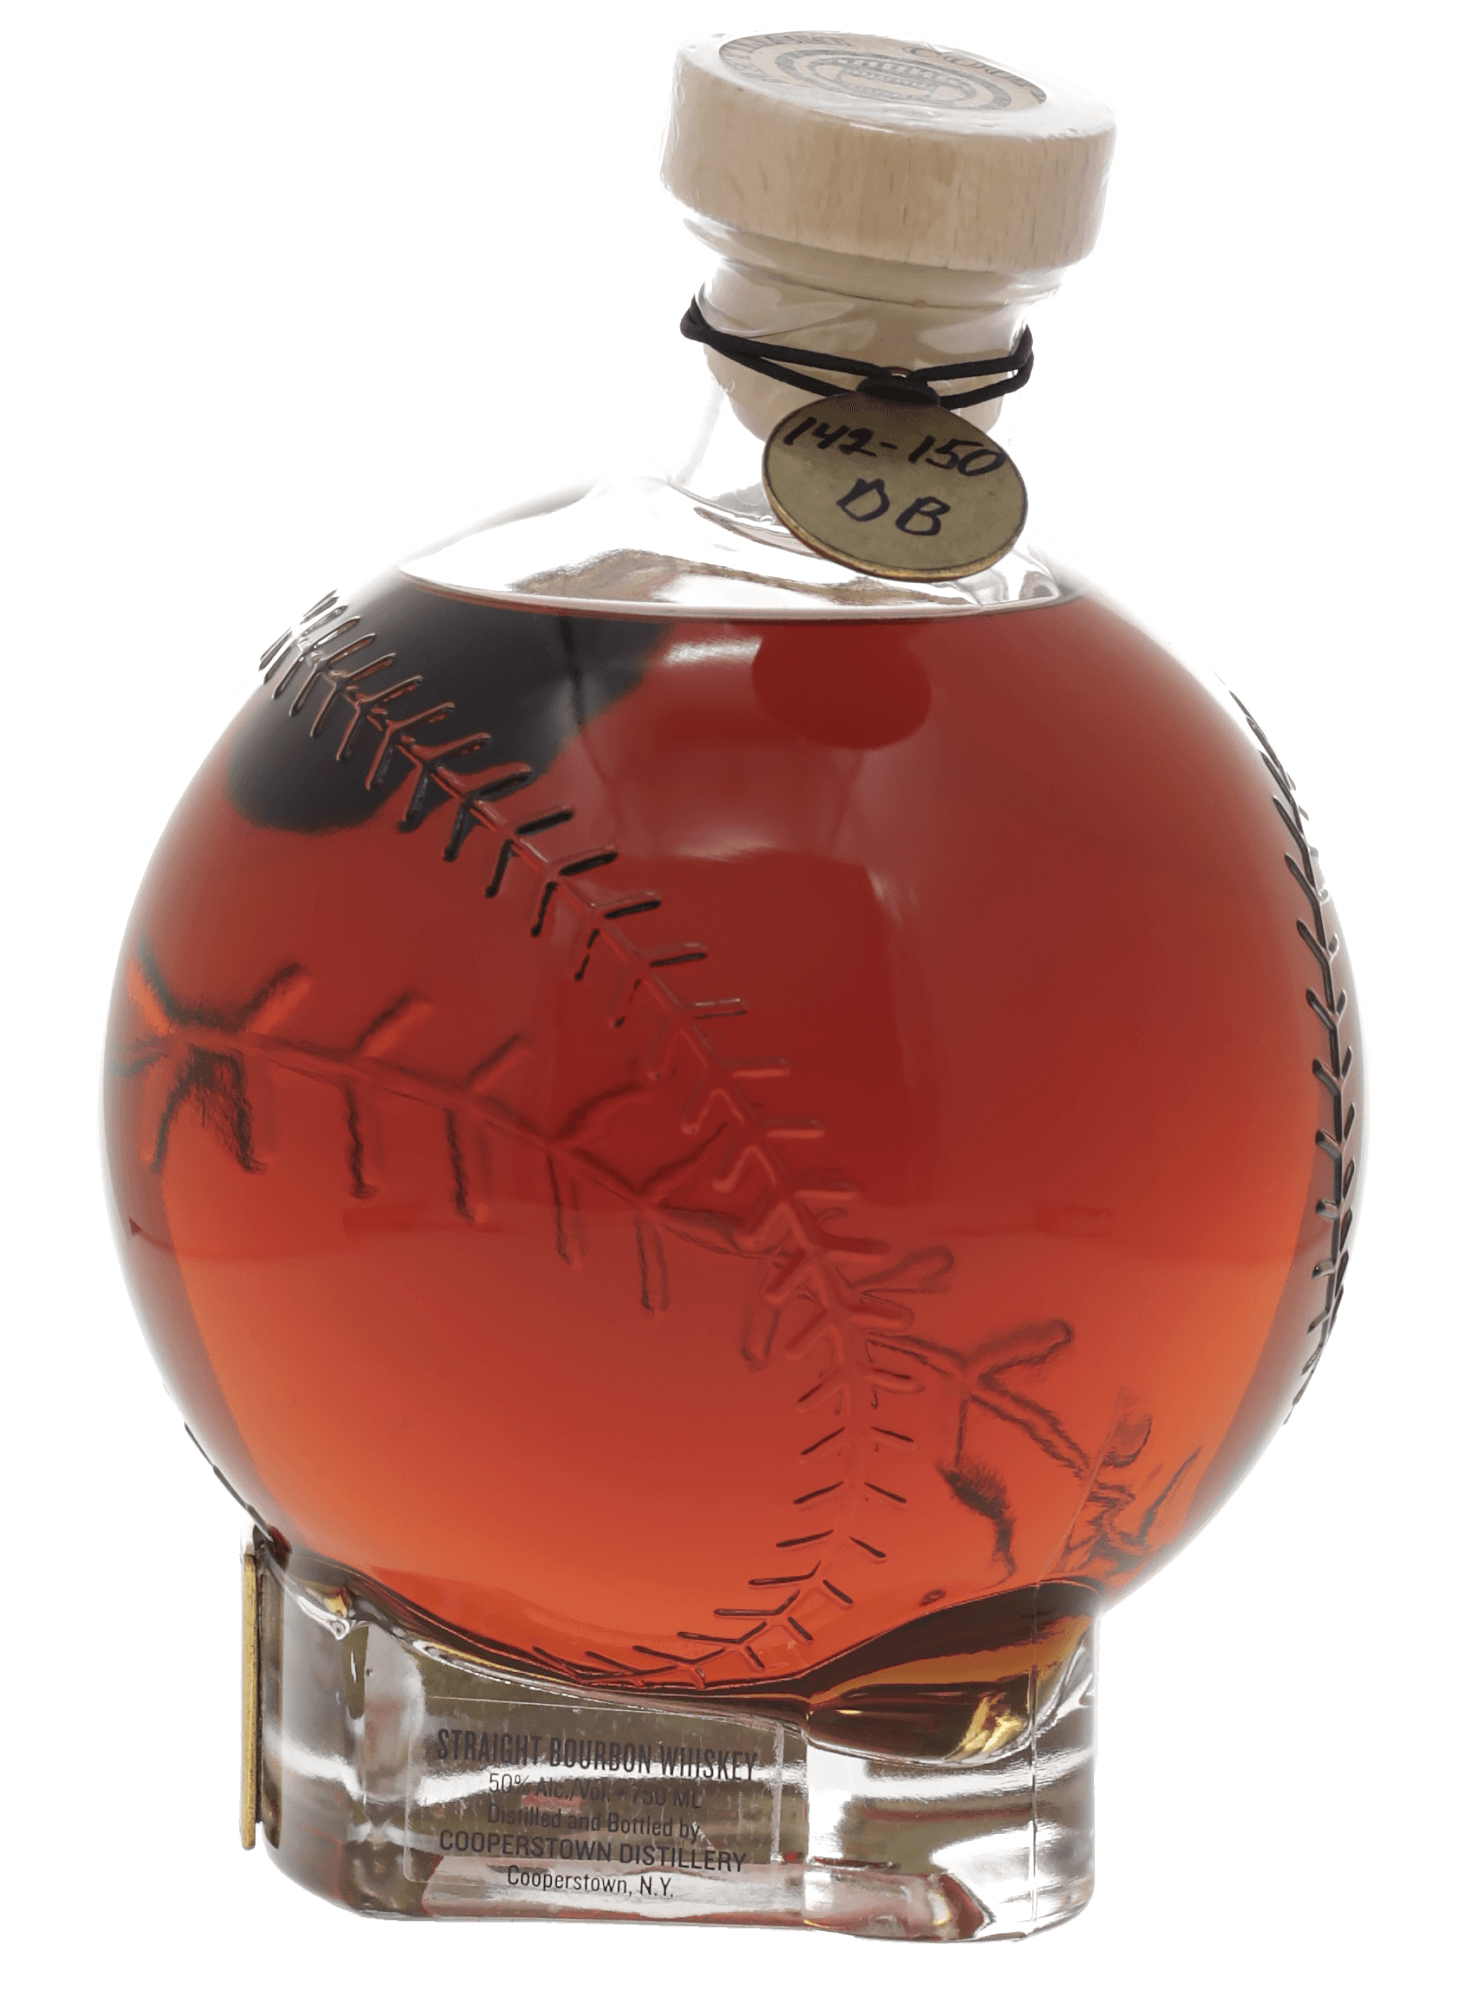 Cooperstown Select Straight Bourbon Whiskey- Limited Edition